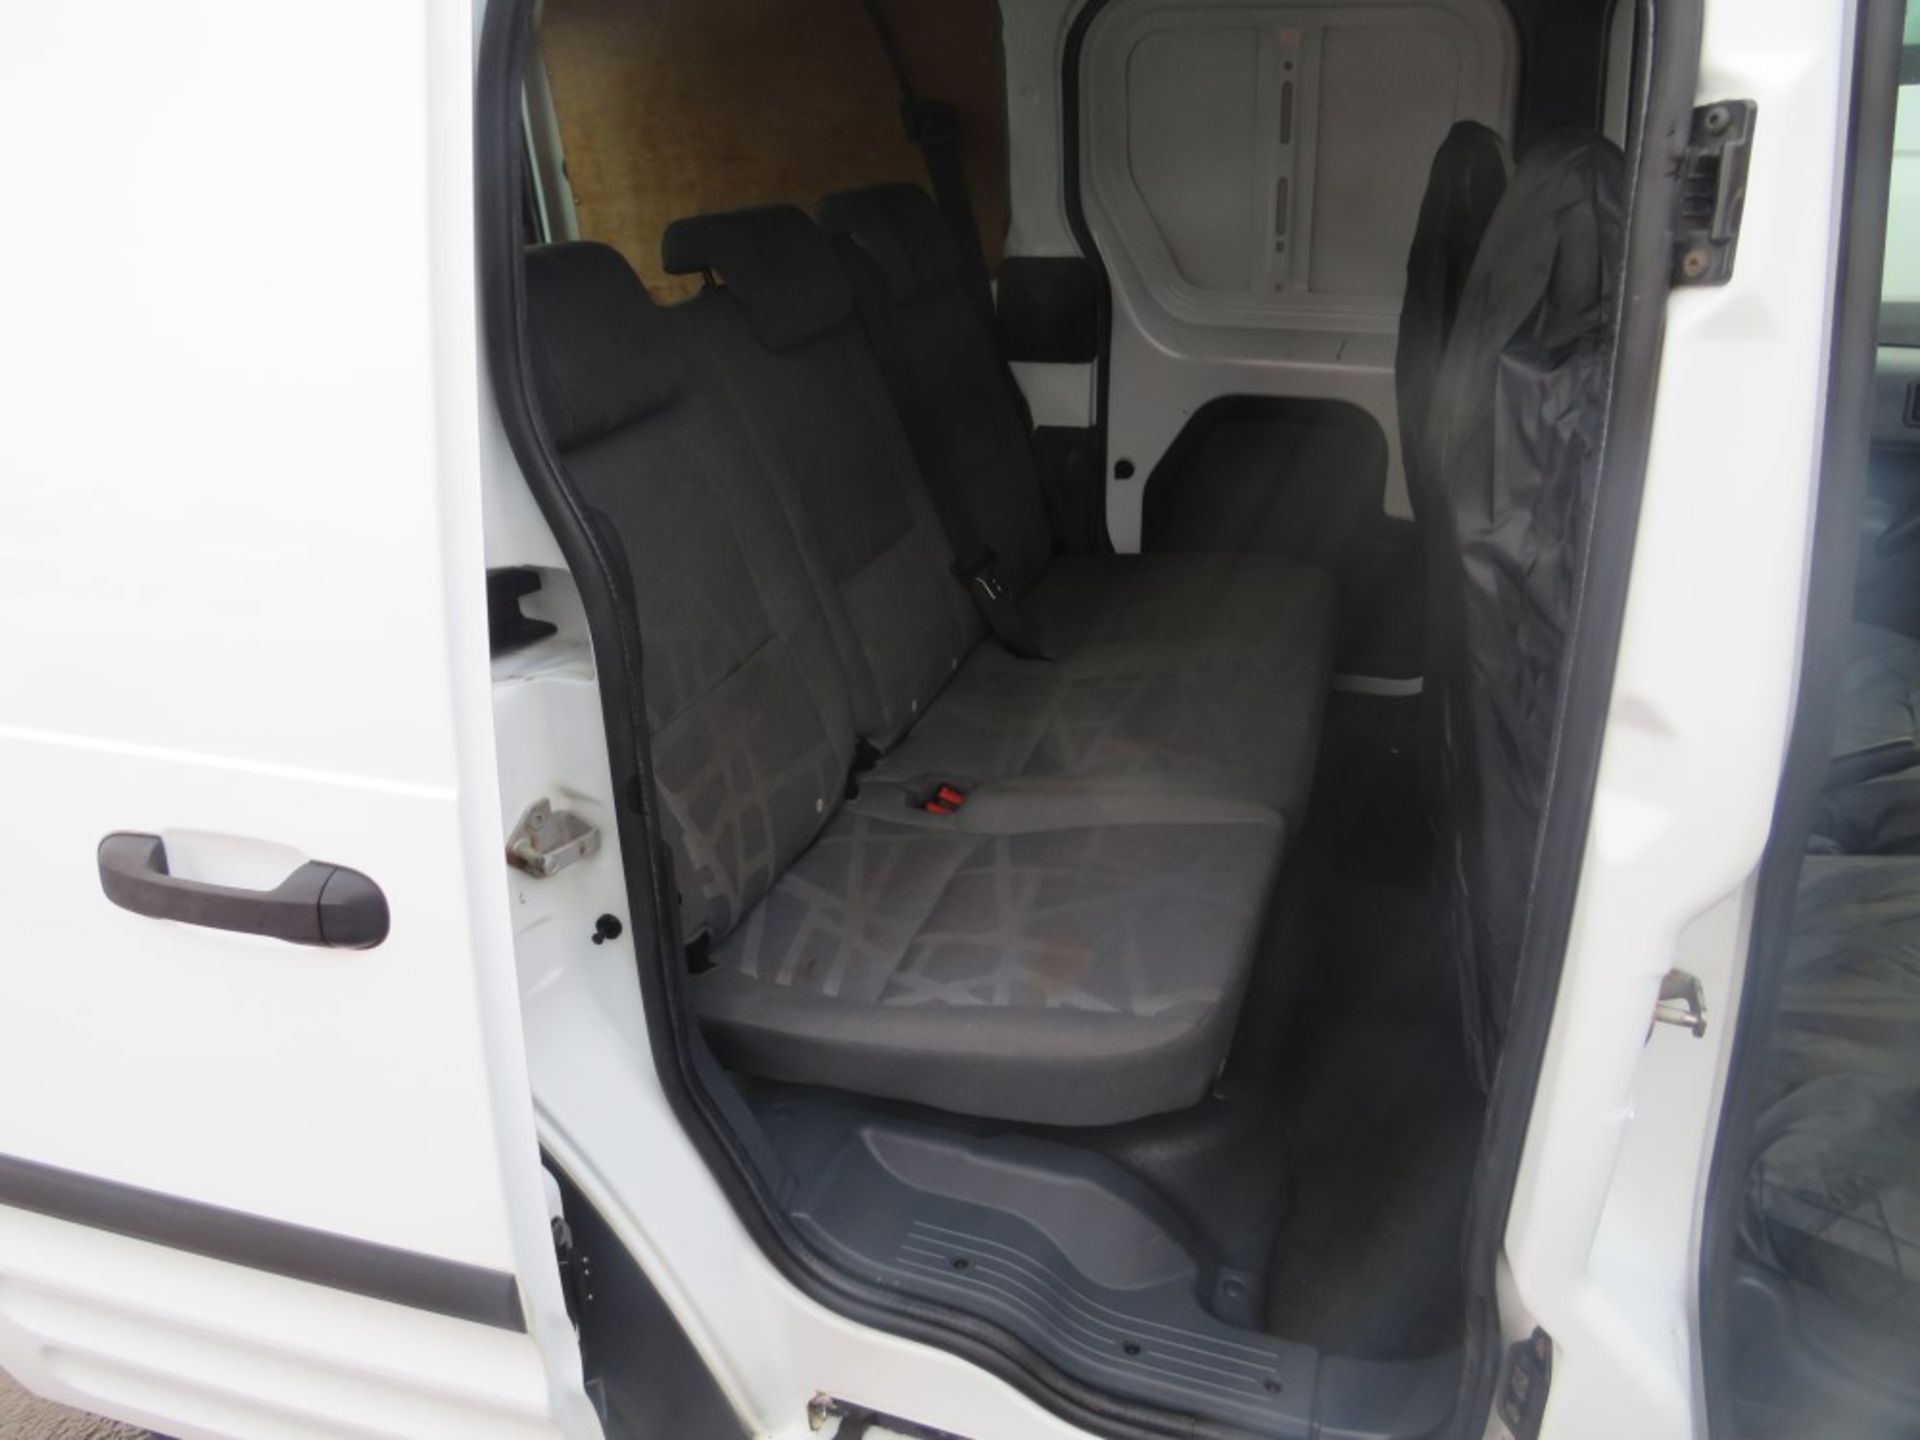 62 reg FORD TRANSIT CONNECT T220 CREW VAN, 1ST REG 10/12, 100065M WARRANTED, V5 HERE, 1 OWNER FROM - Image 5 of 7